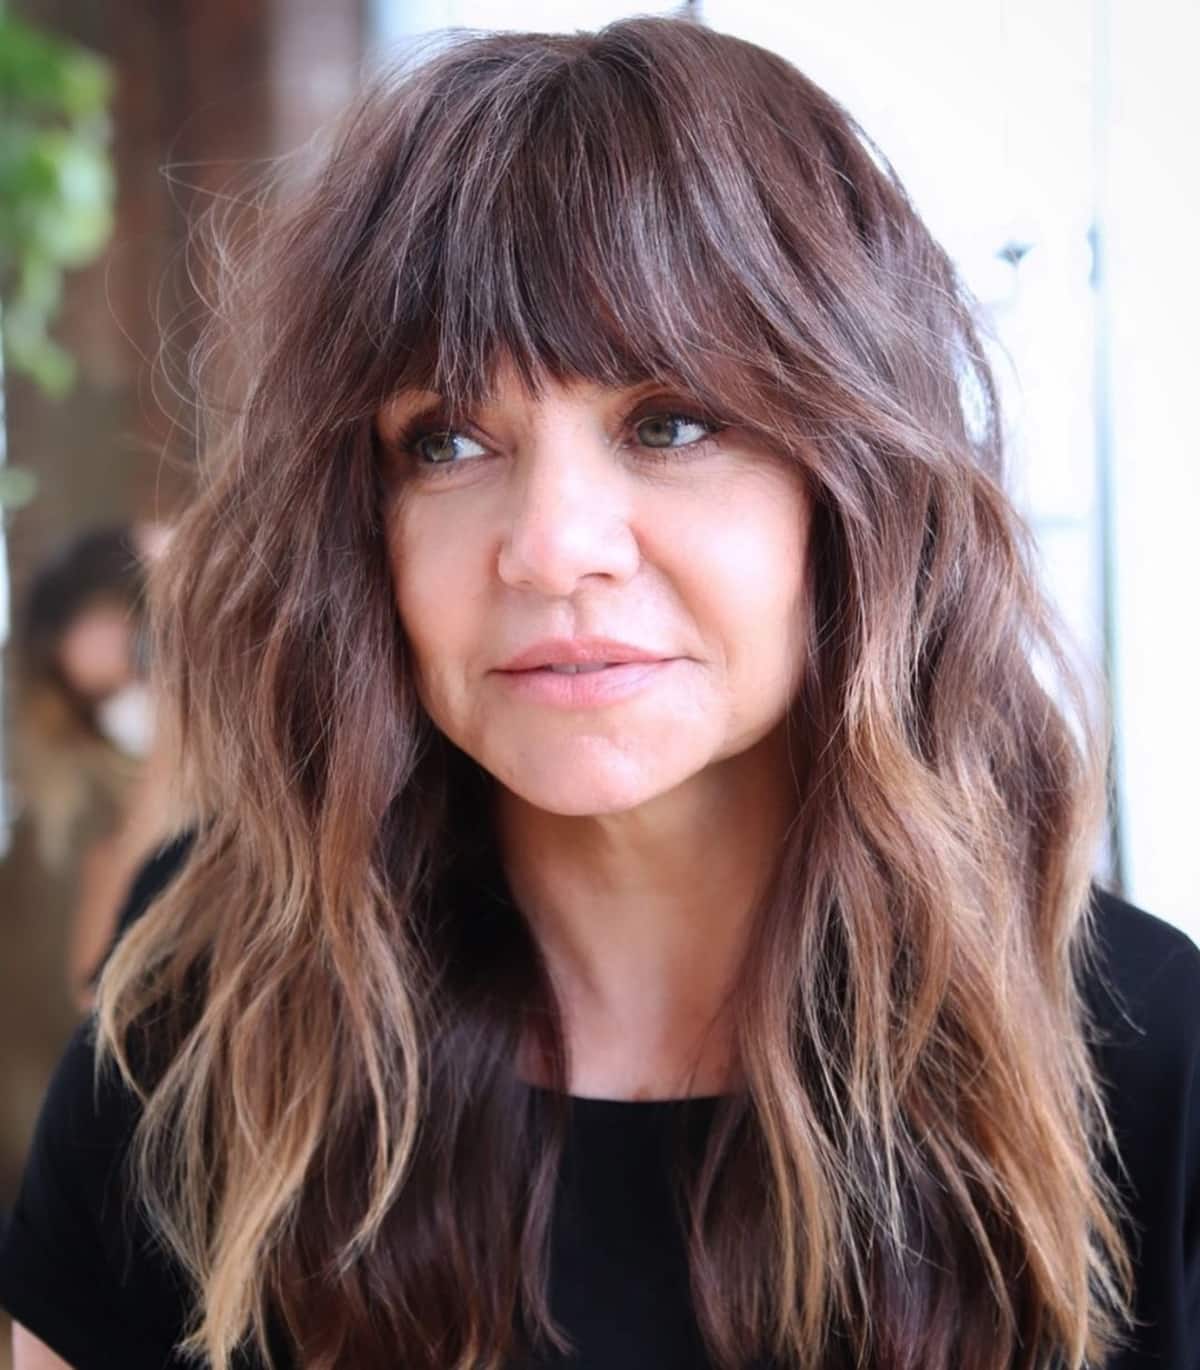 70s-Inspired Shag Cut with Long Bangs